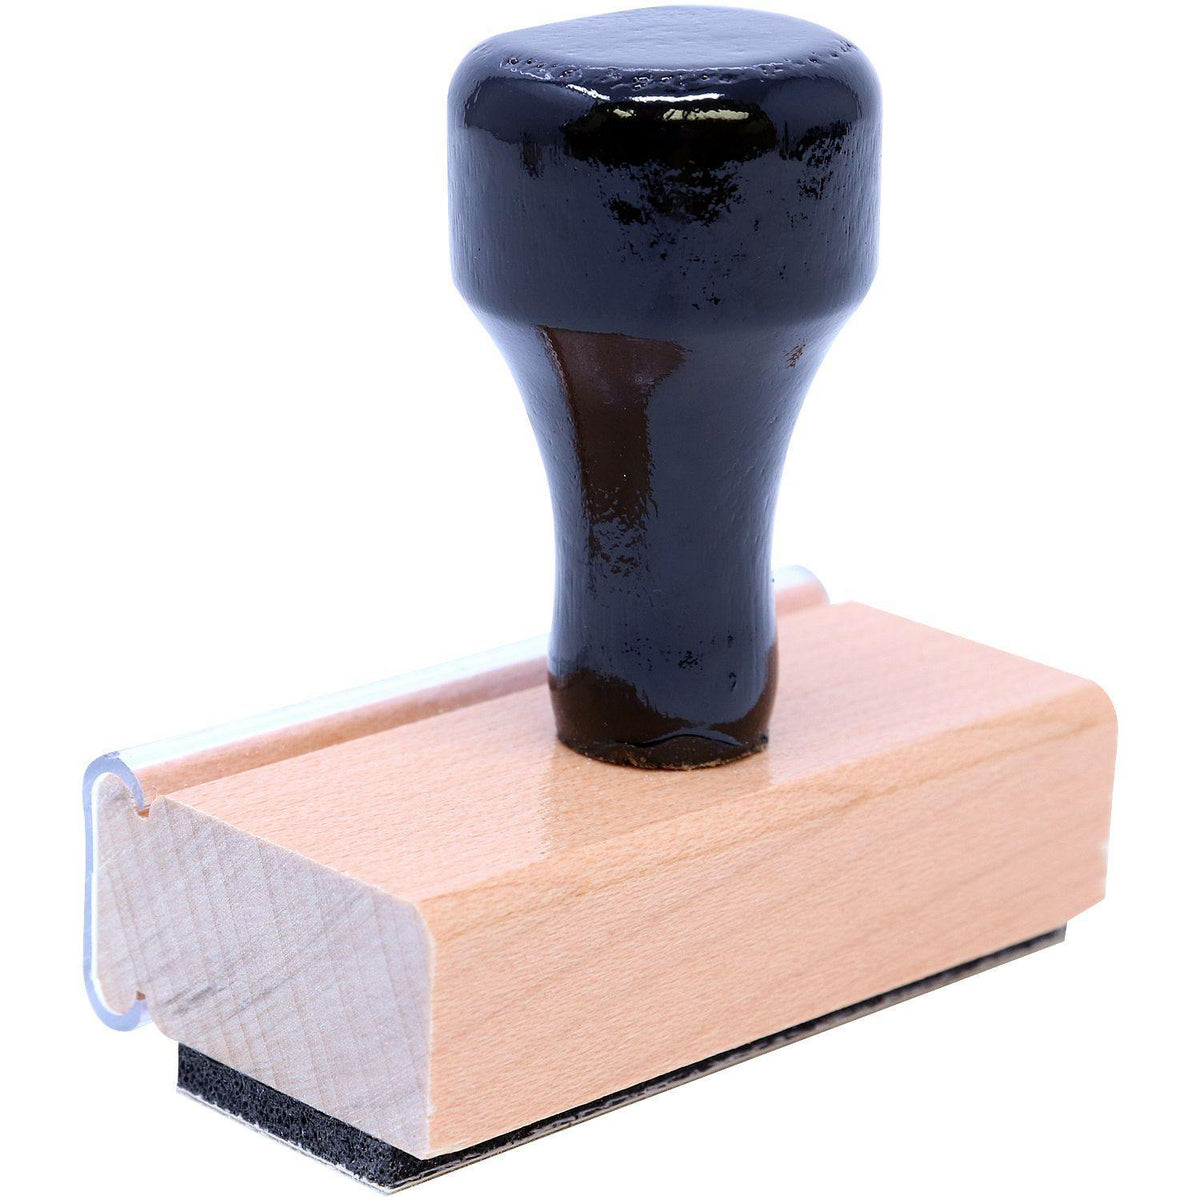 Non-Smoker Rubber Stamp - Engineer Seal Stamps - Brand_Acorn, Impression Size_Small, Stamp Type_Regular Stamp, Type of Use_Medical Office, Type of Use_Office